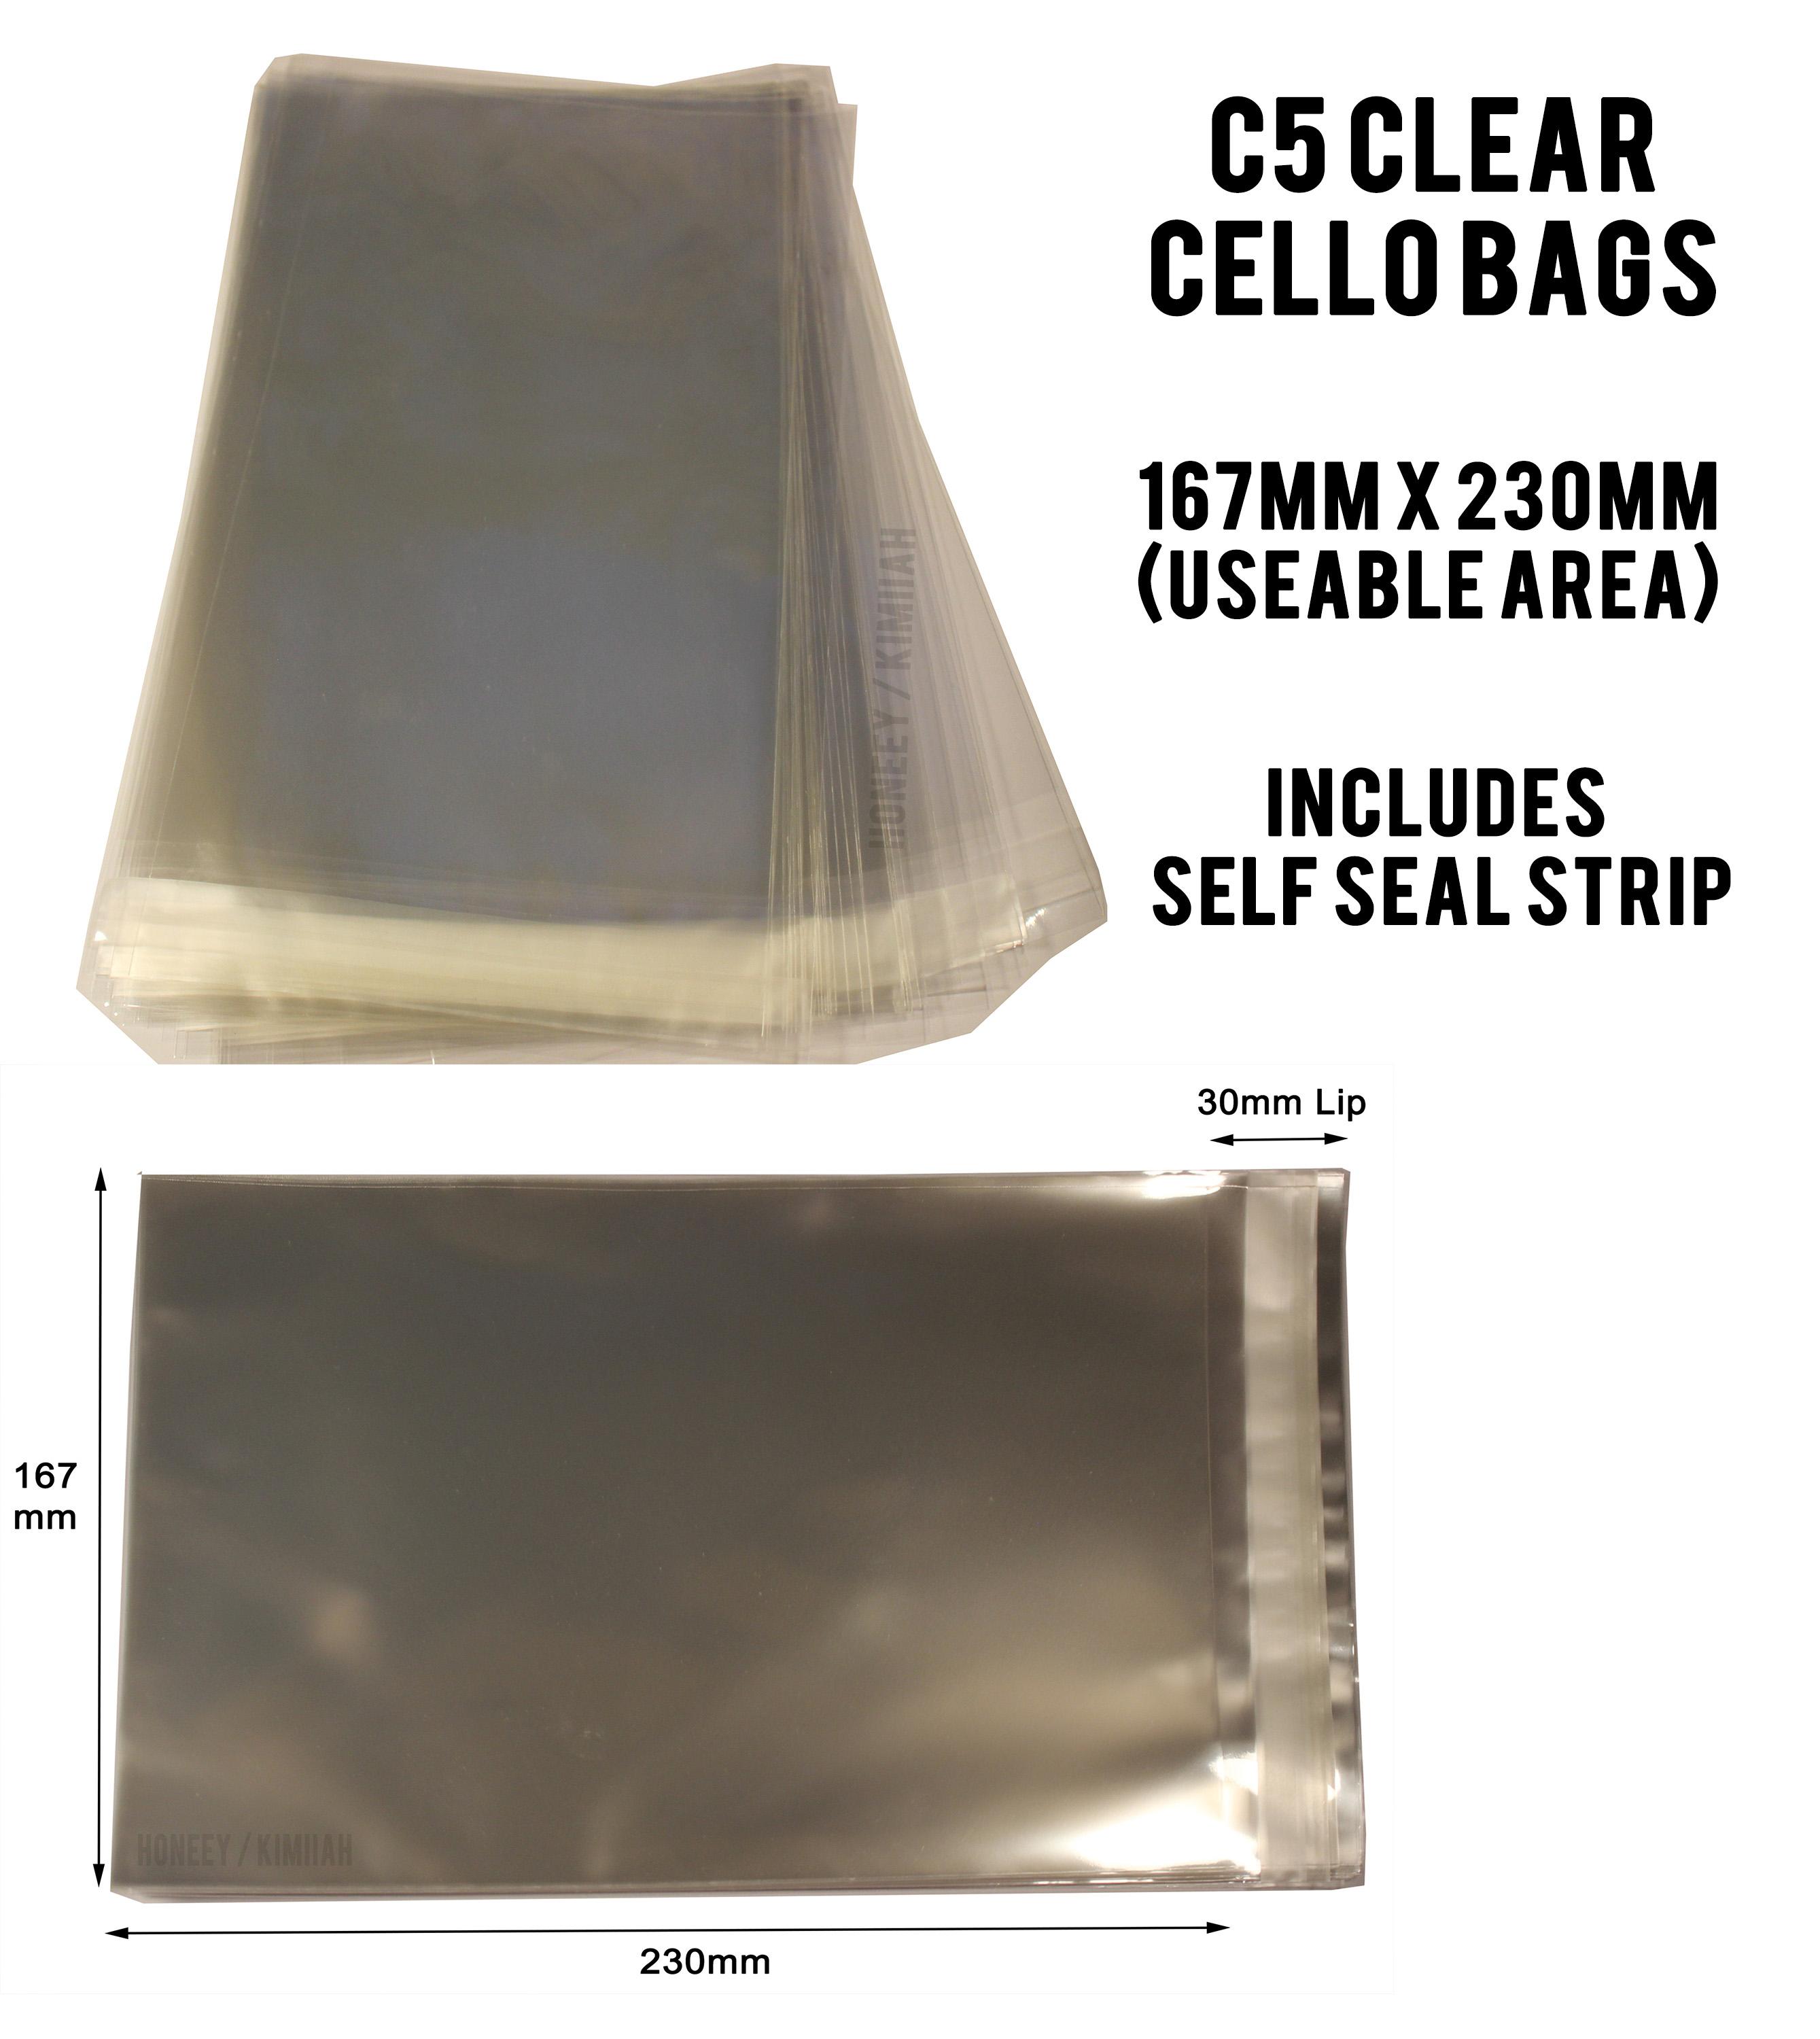 A5 Cello Bag Cover with information